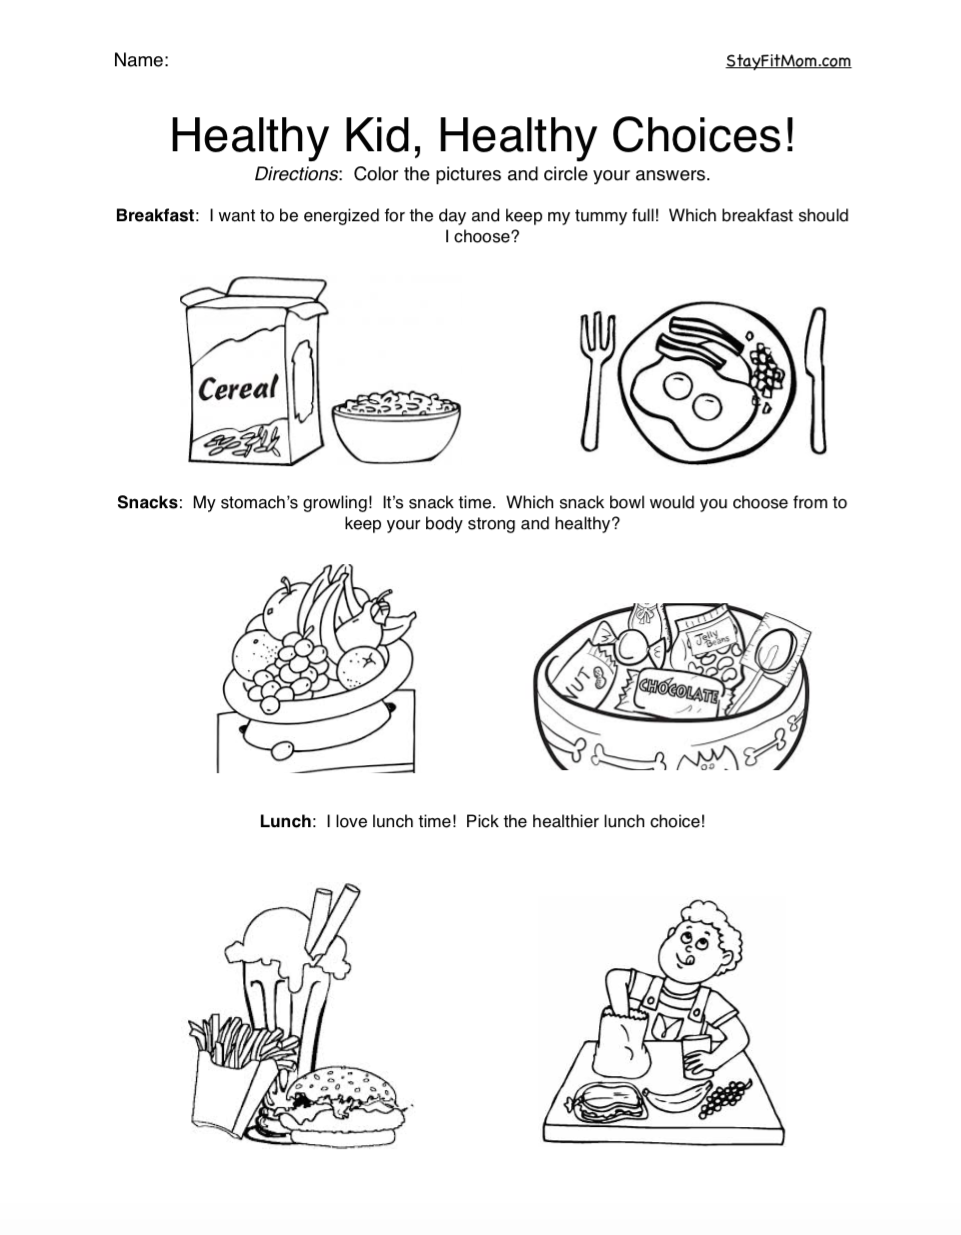 Fun coloring page used to encourage kids to make healthy choices!